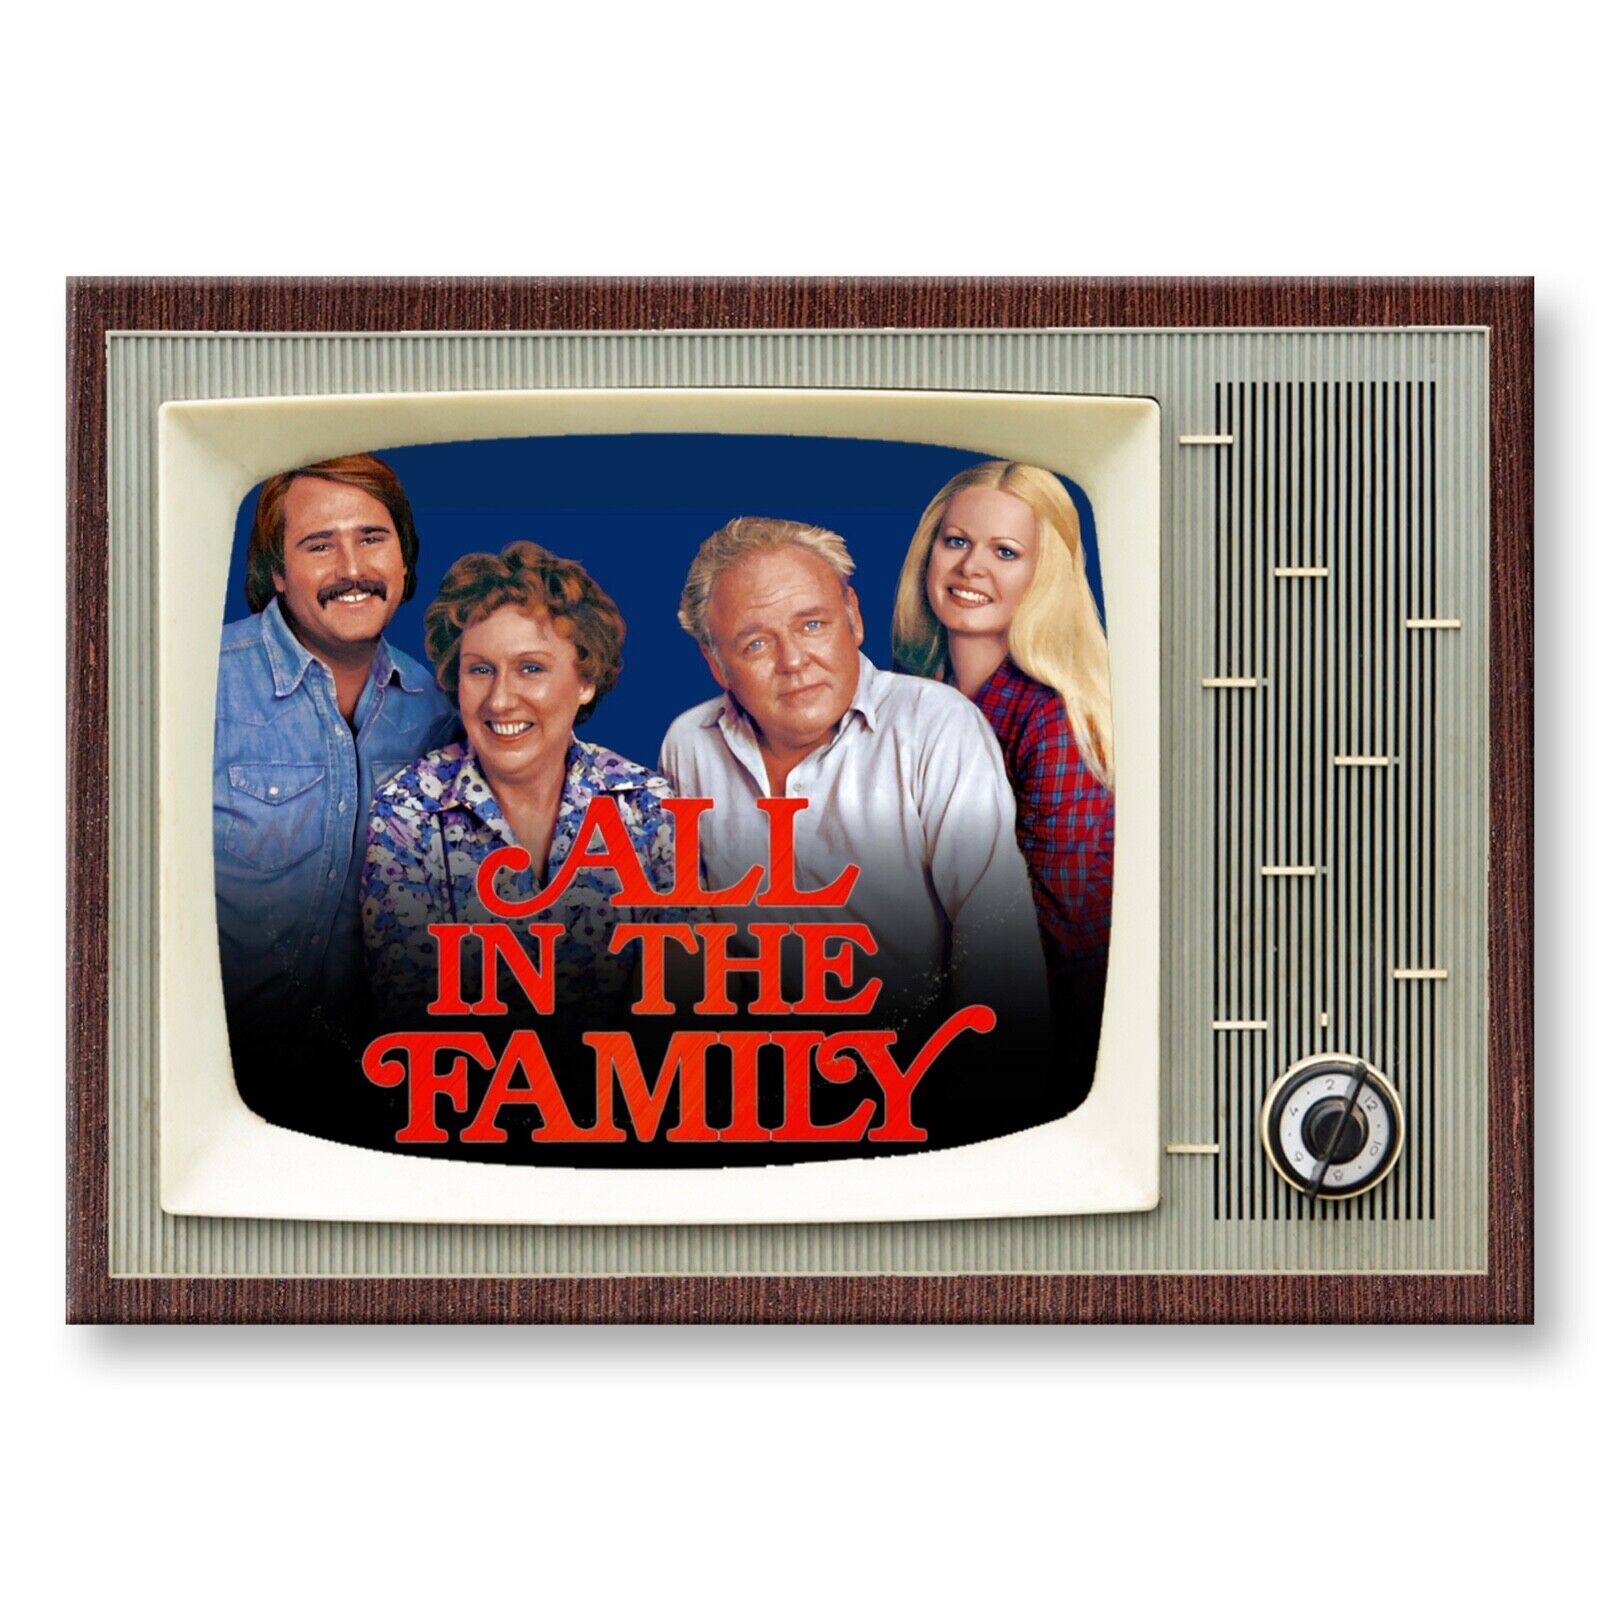 All in the Family TV Show Classic TV 3.5 inches x 2.5 inches Steel Fridge Magnet